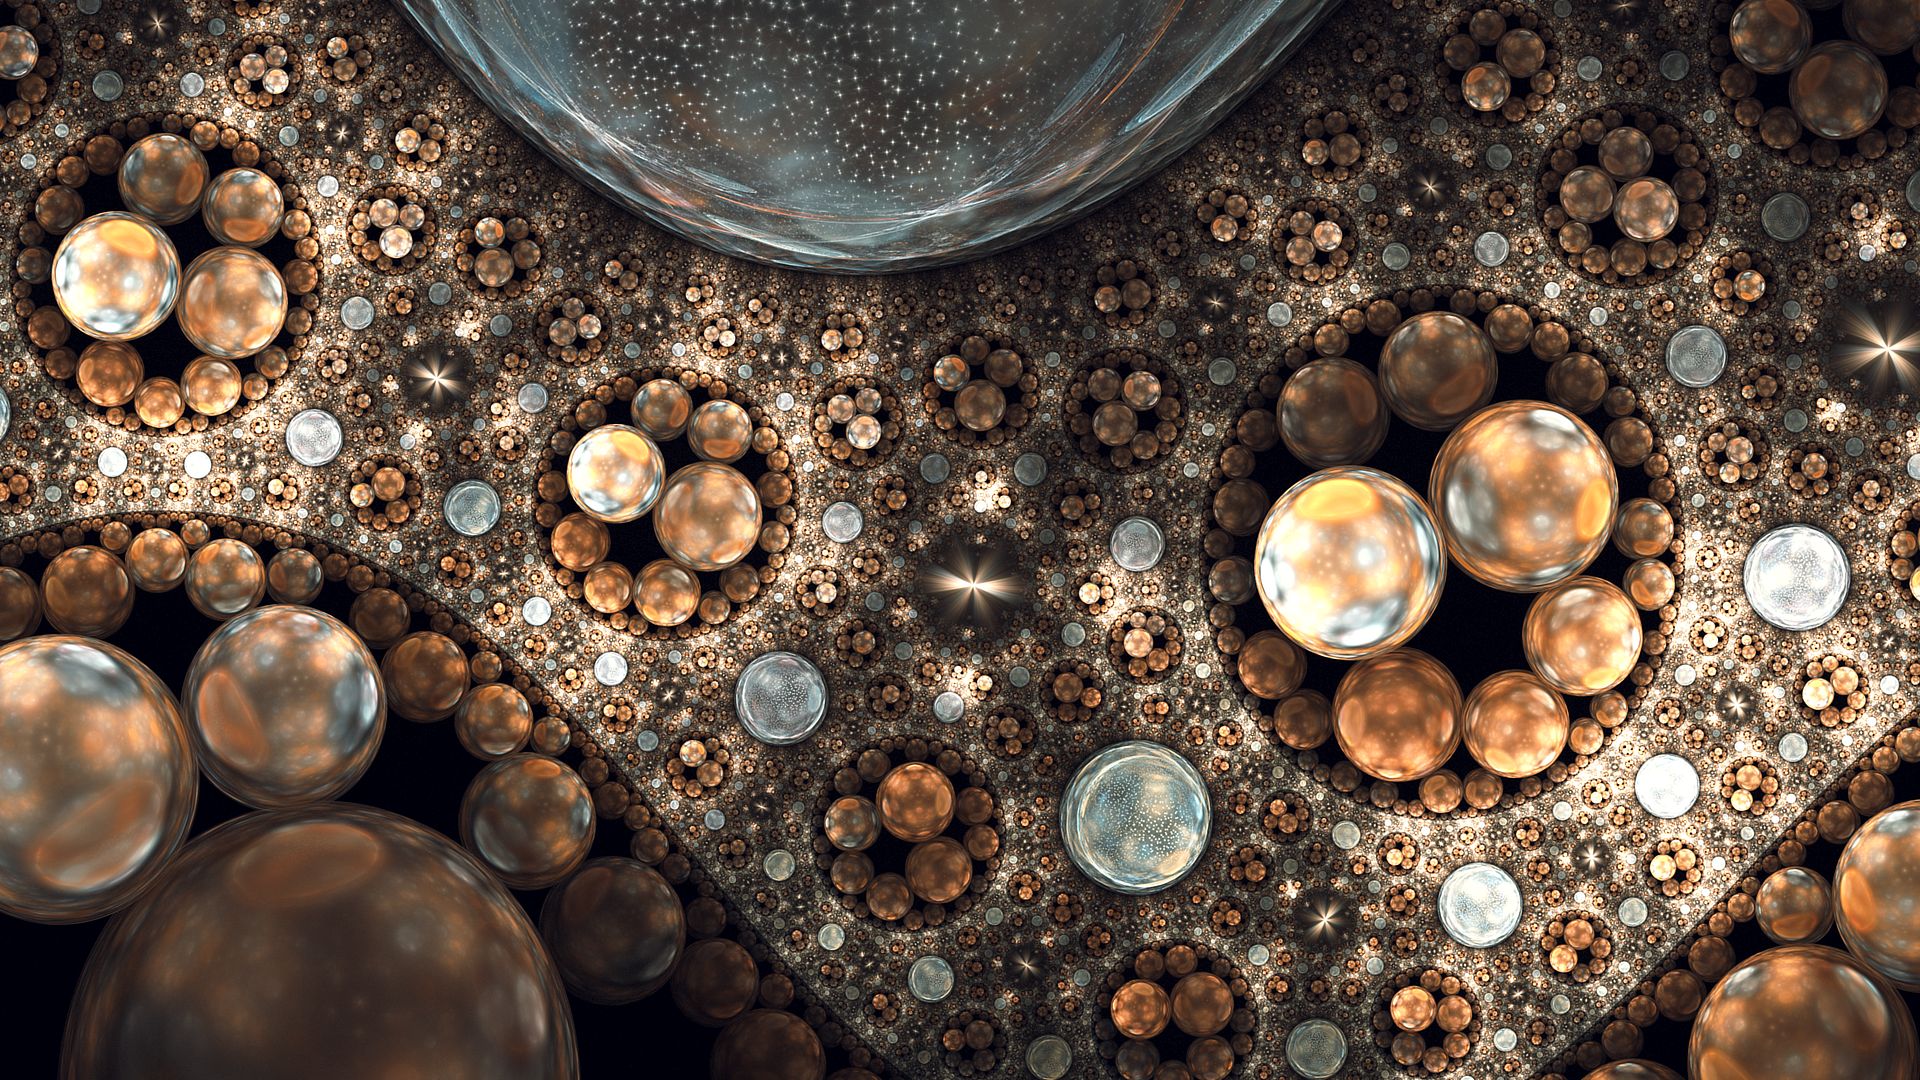 Download mobile wallpaper Abstract, Fractal, Sphere for free.